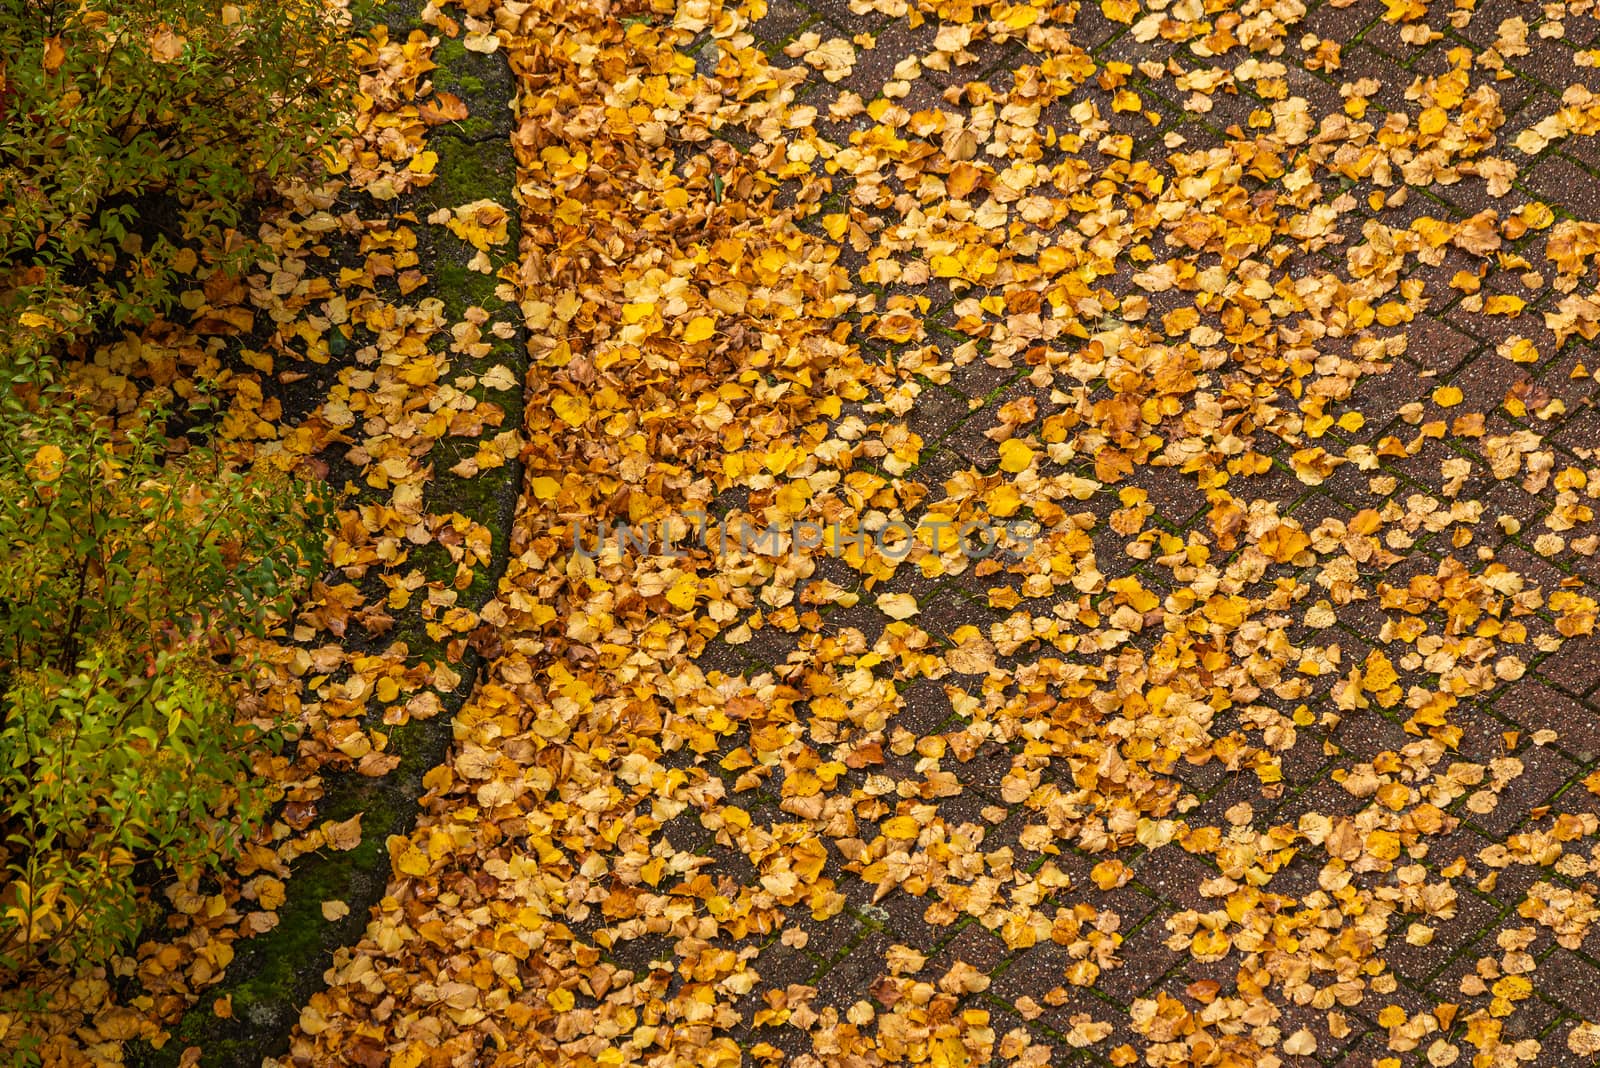 View from above of colorful autumn leaves in a parking lot by Pendleton